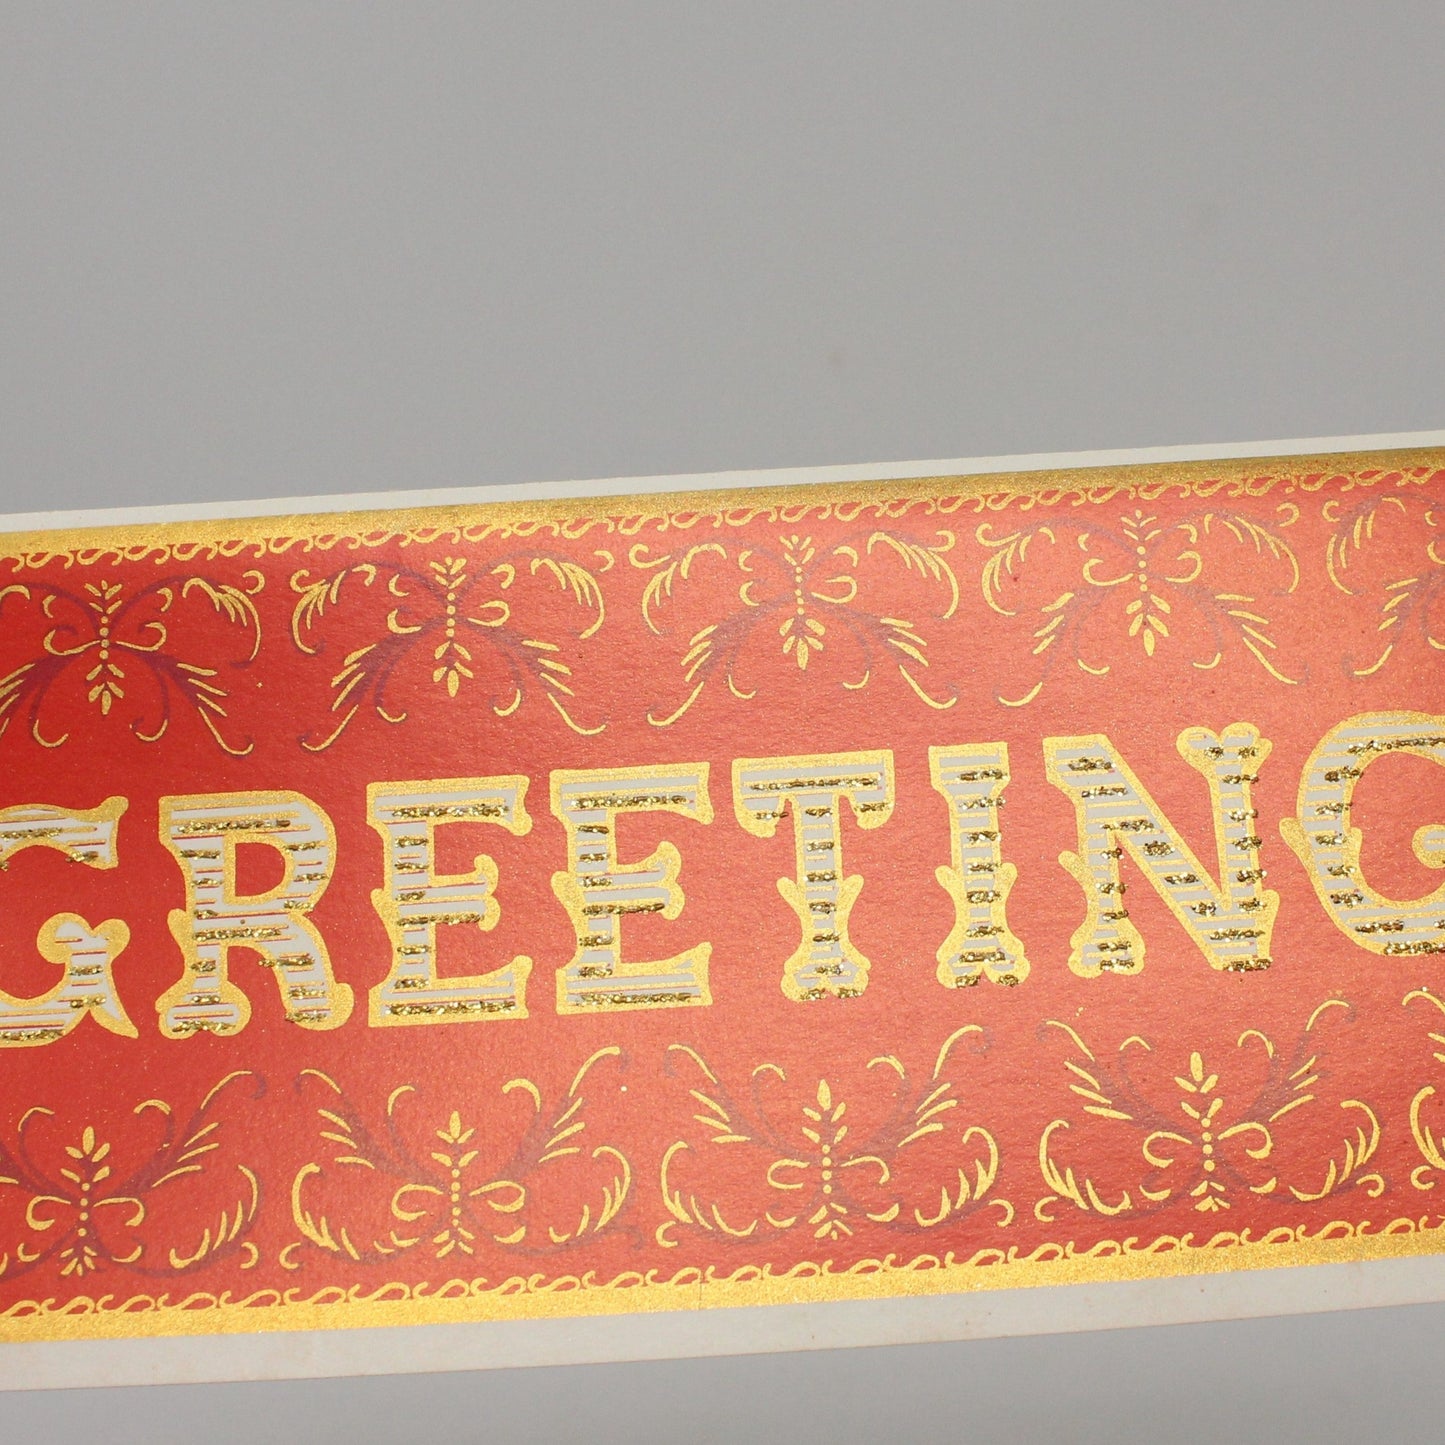 Greeting Card / Christmas Card, Art Design by Brook, Red & Gold Greetings, Vintage